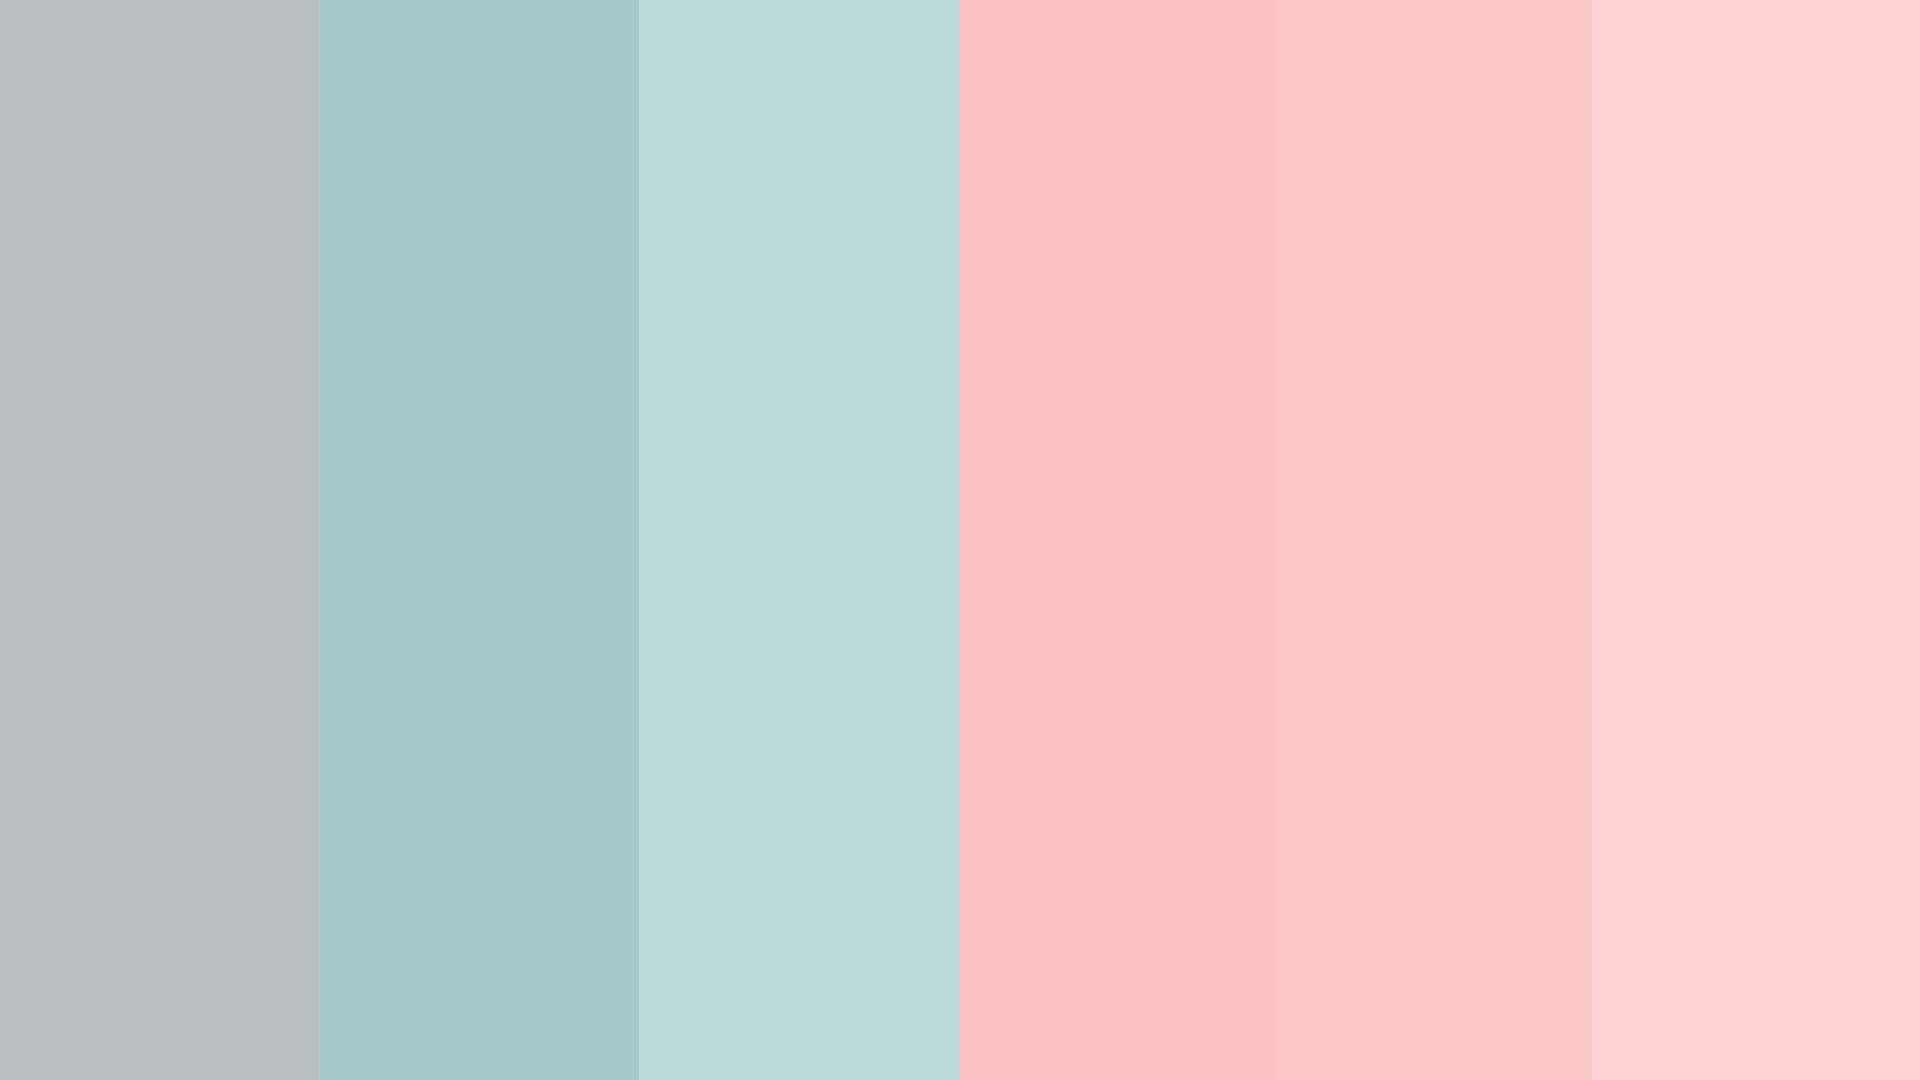 An Abstract Blend Of Pink And Teal Colors. Wallpaper